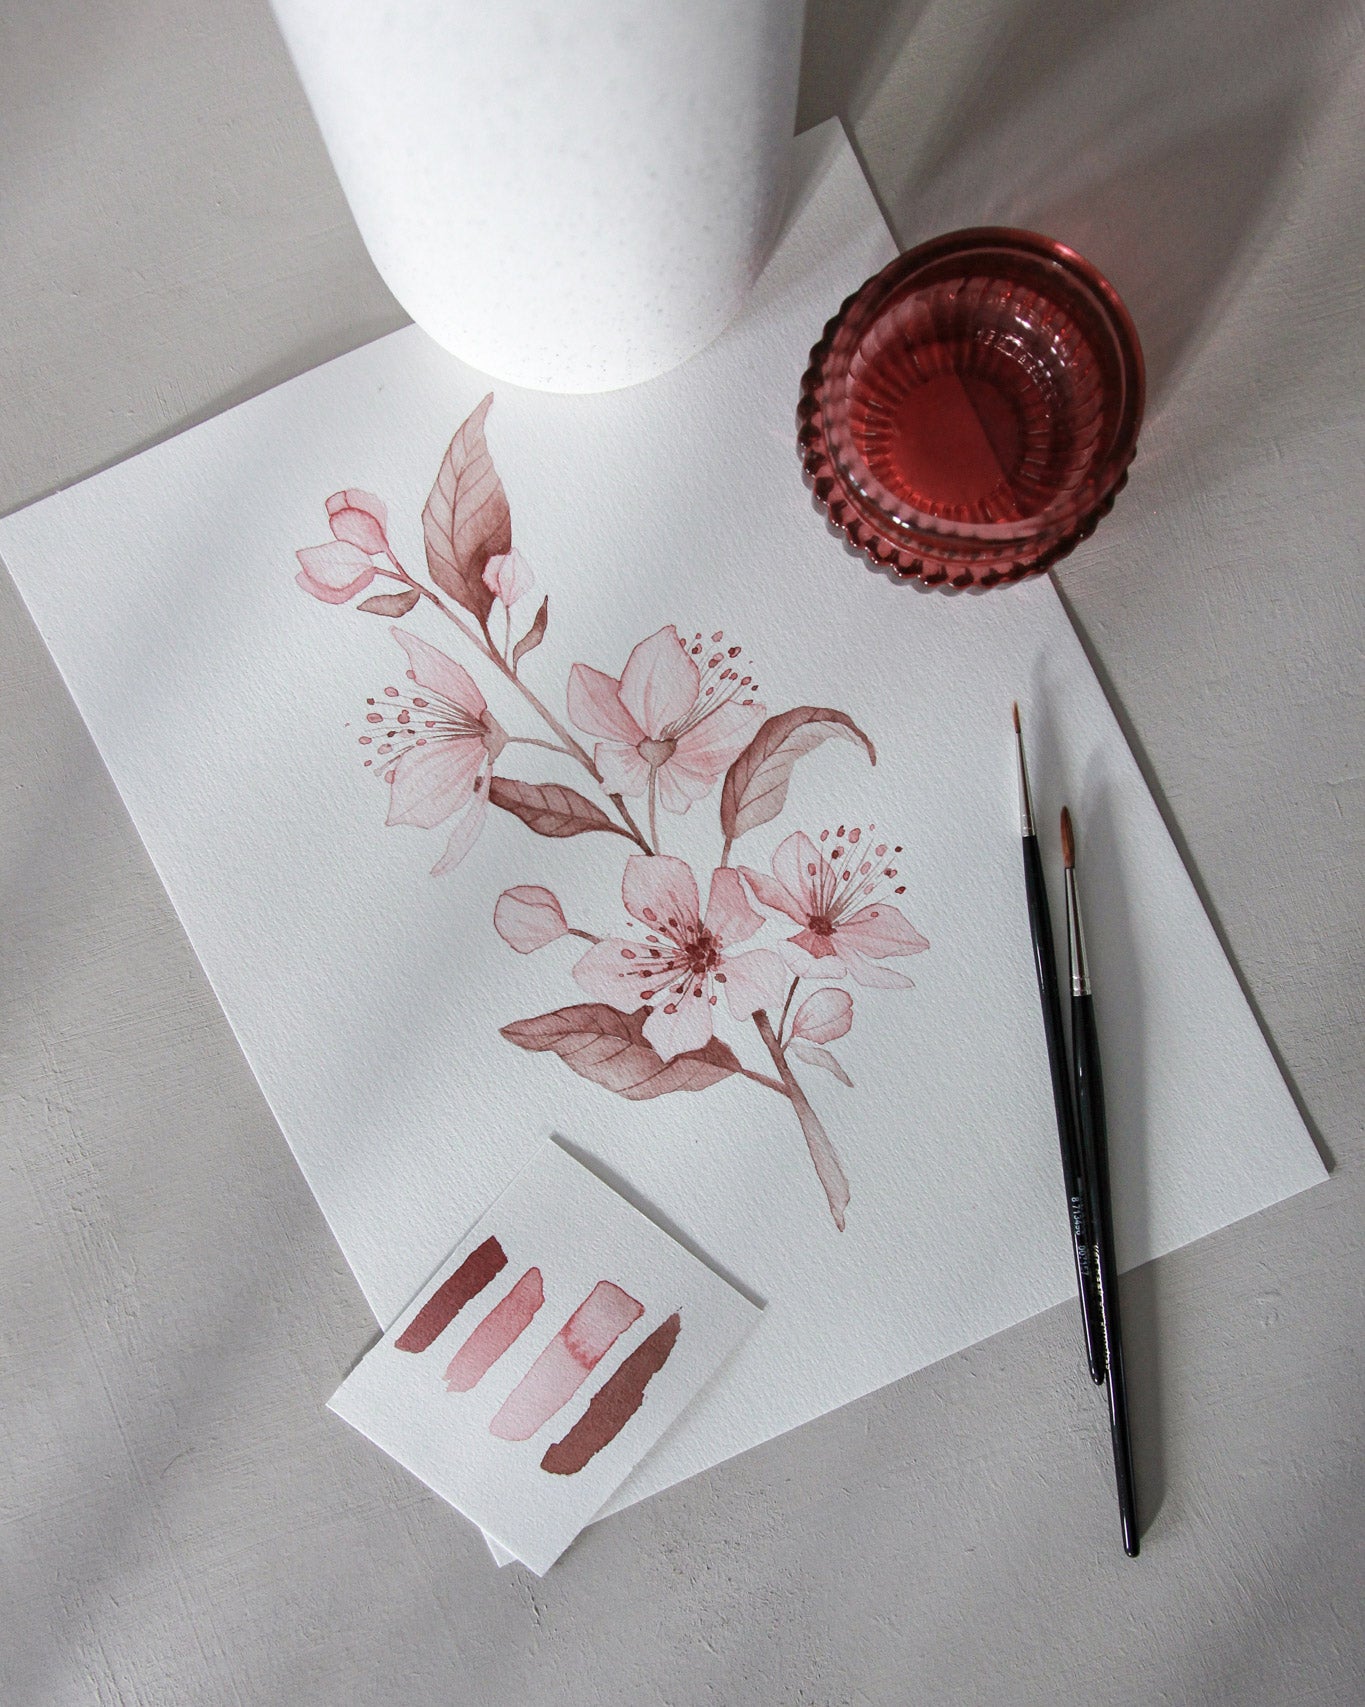 Free watercolor class - Spring Blossom